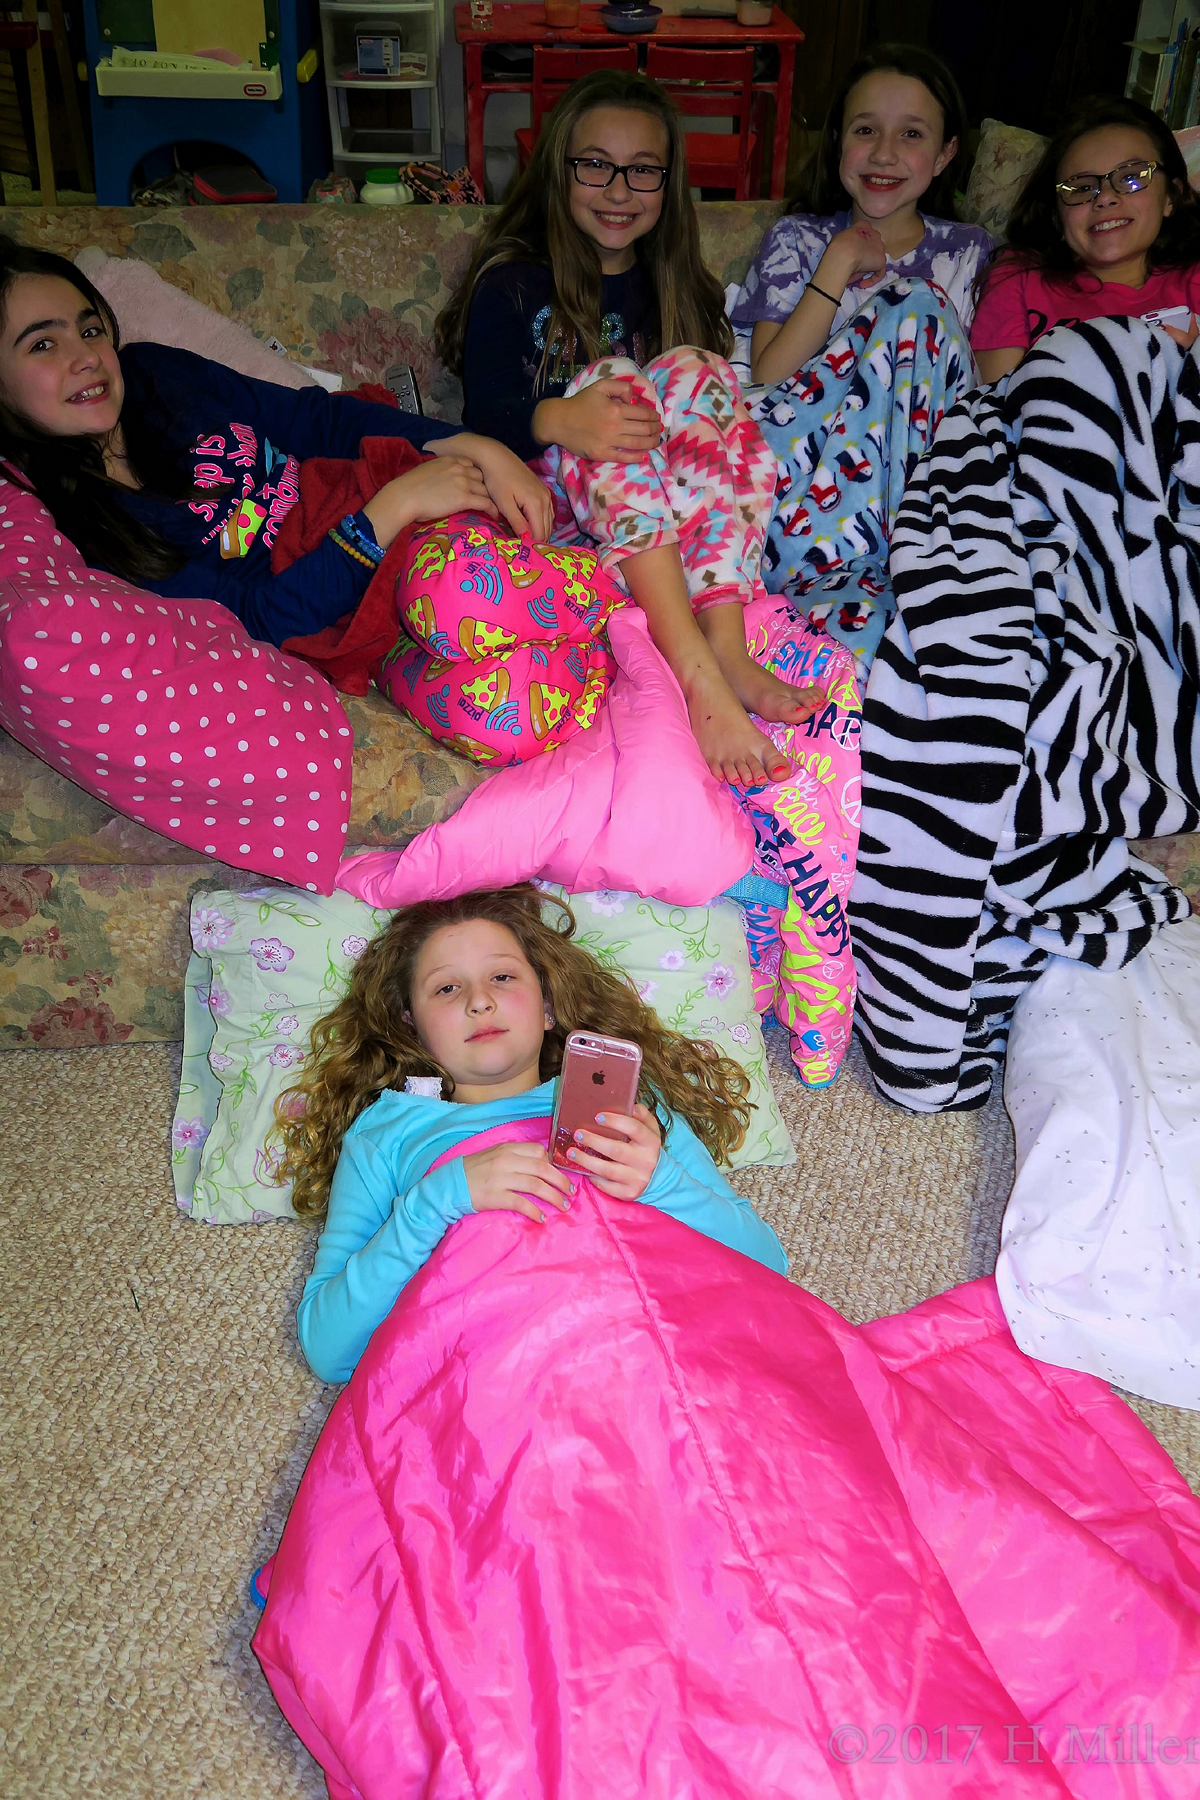 Everyone Is Getting Ready For A Fun Sleepover Party! 1